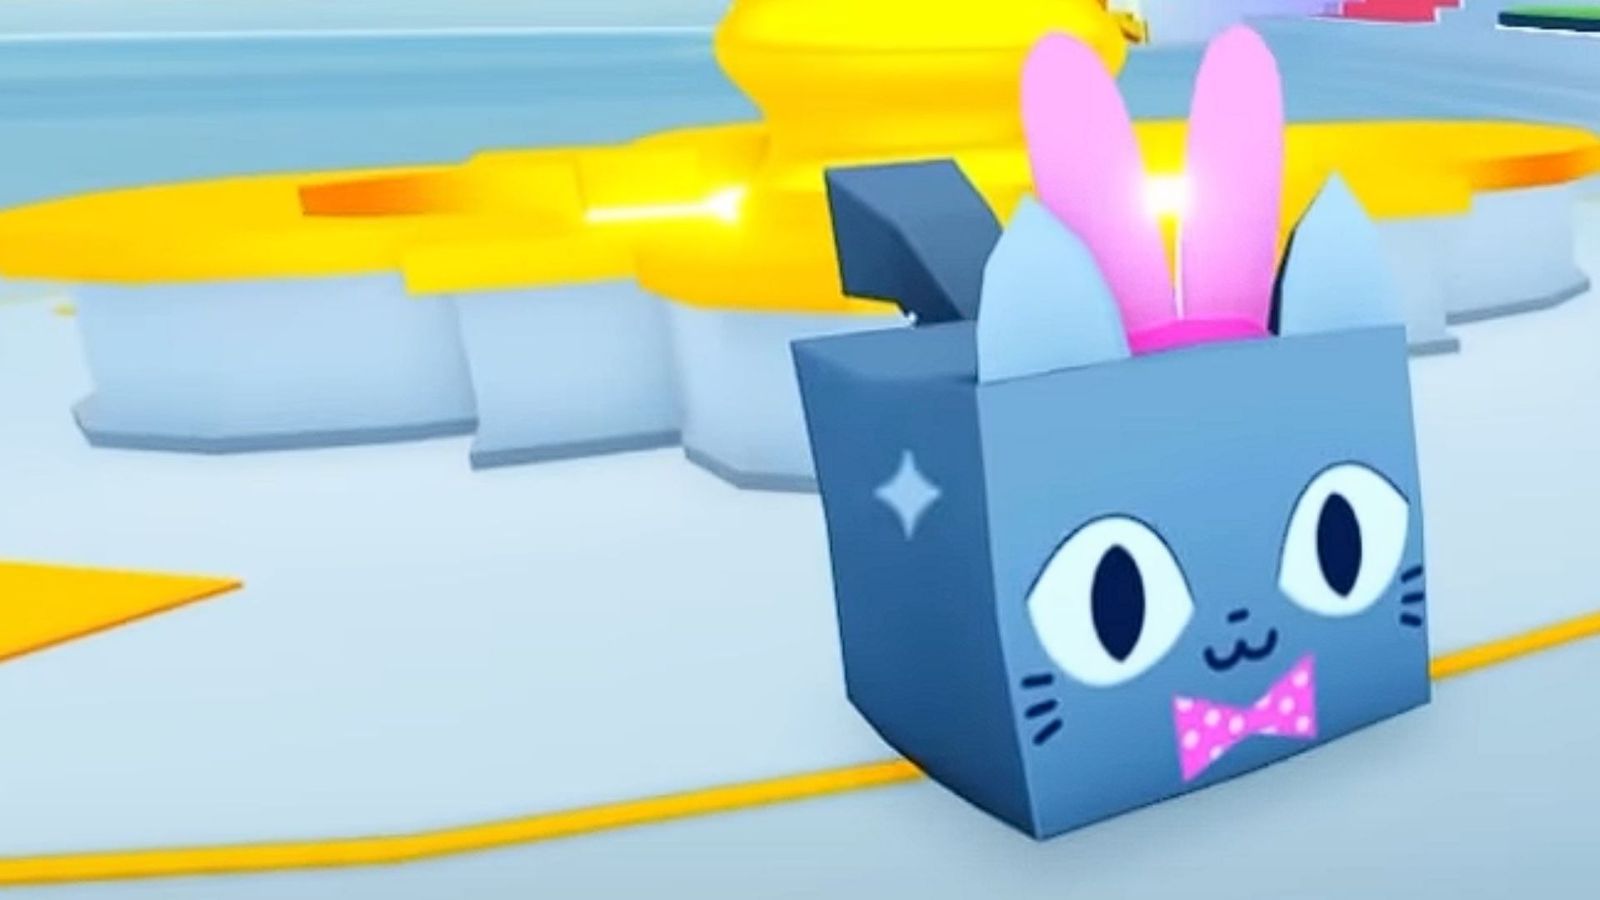 The Huge Easter Cat from the 2022 Roblox Pet Simulator X Easter event.